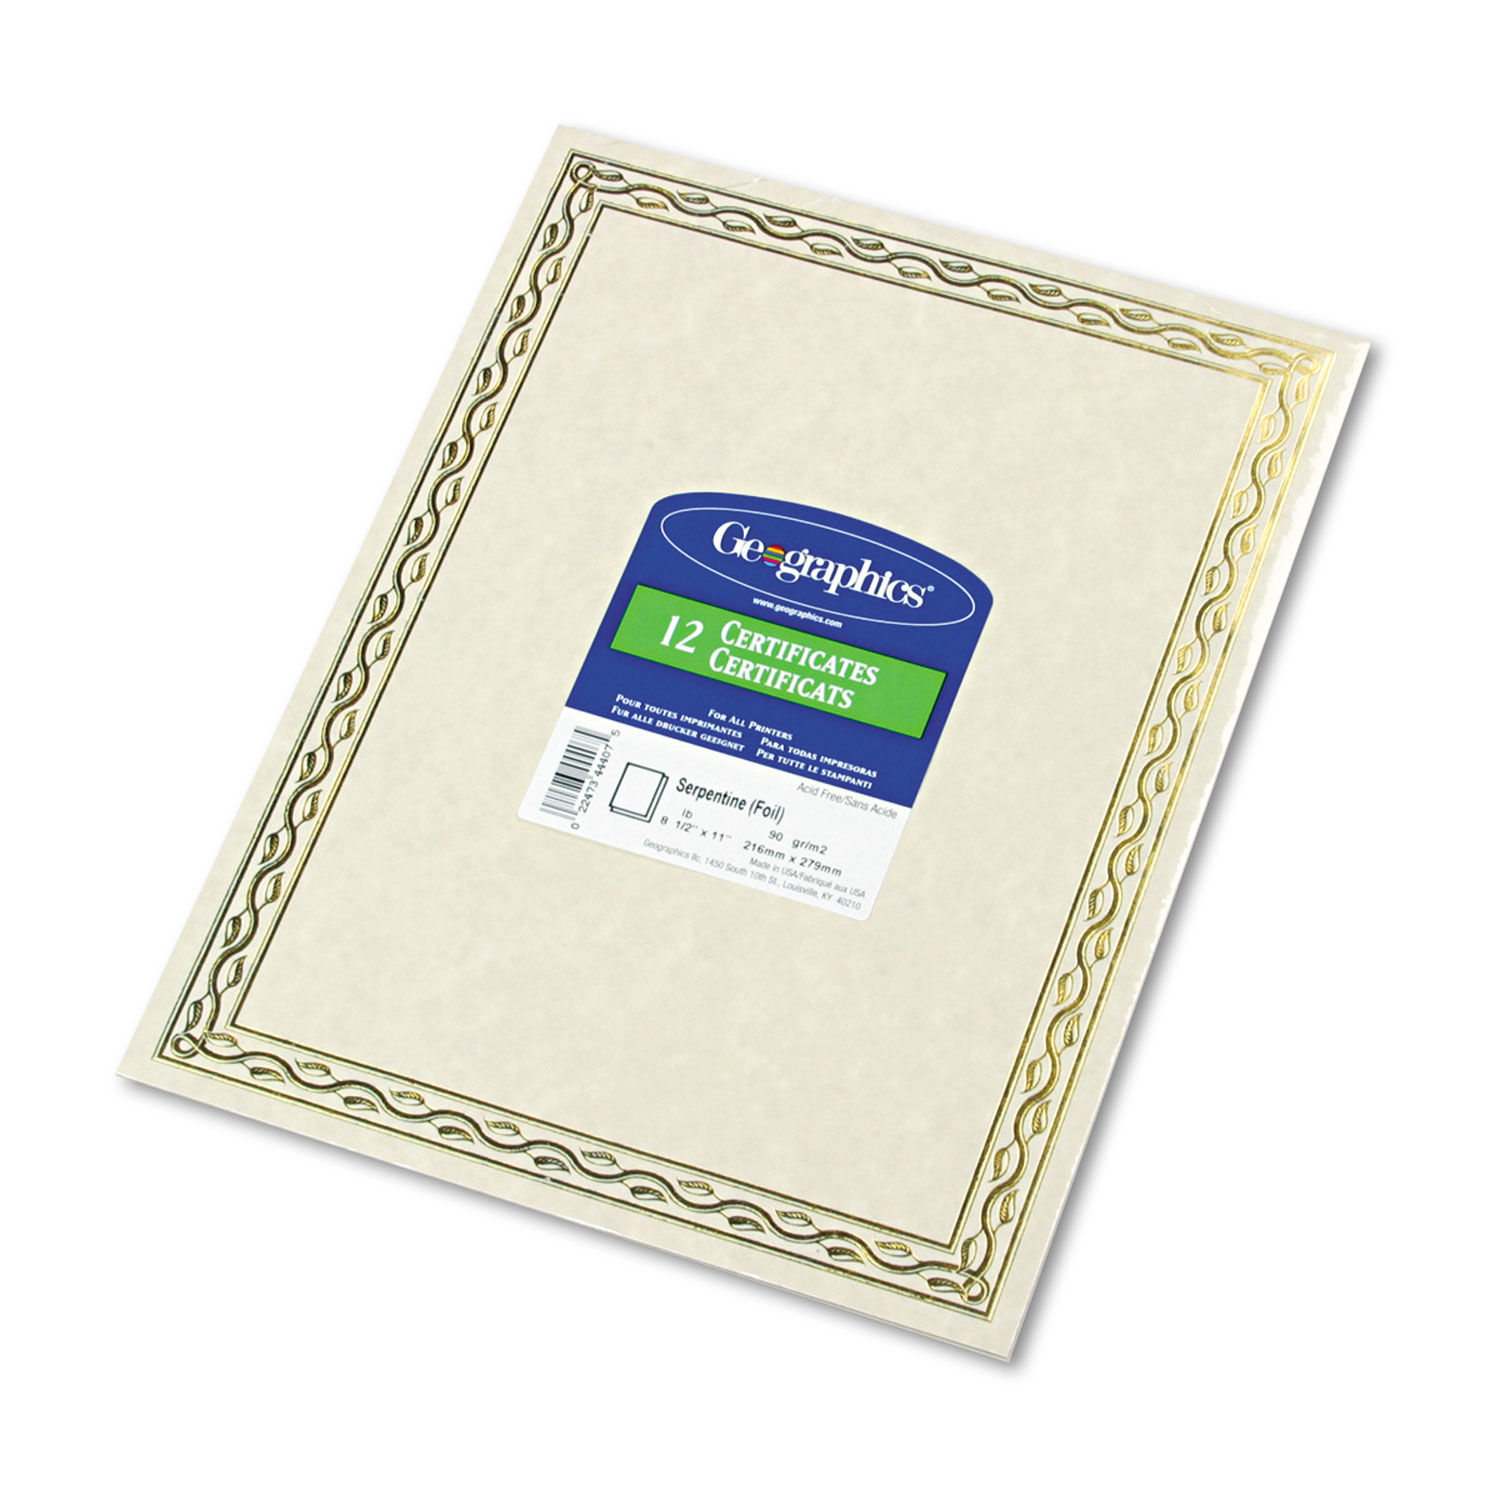 Foil Stamped Award Certificates by Geographicsandreg; GEO44407